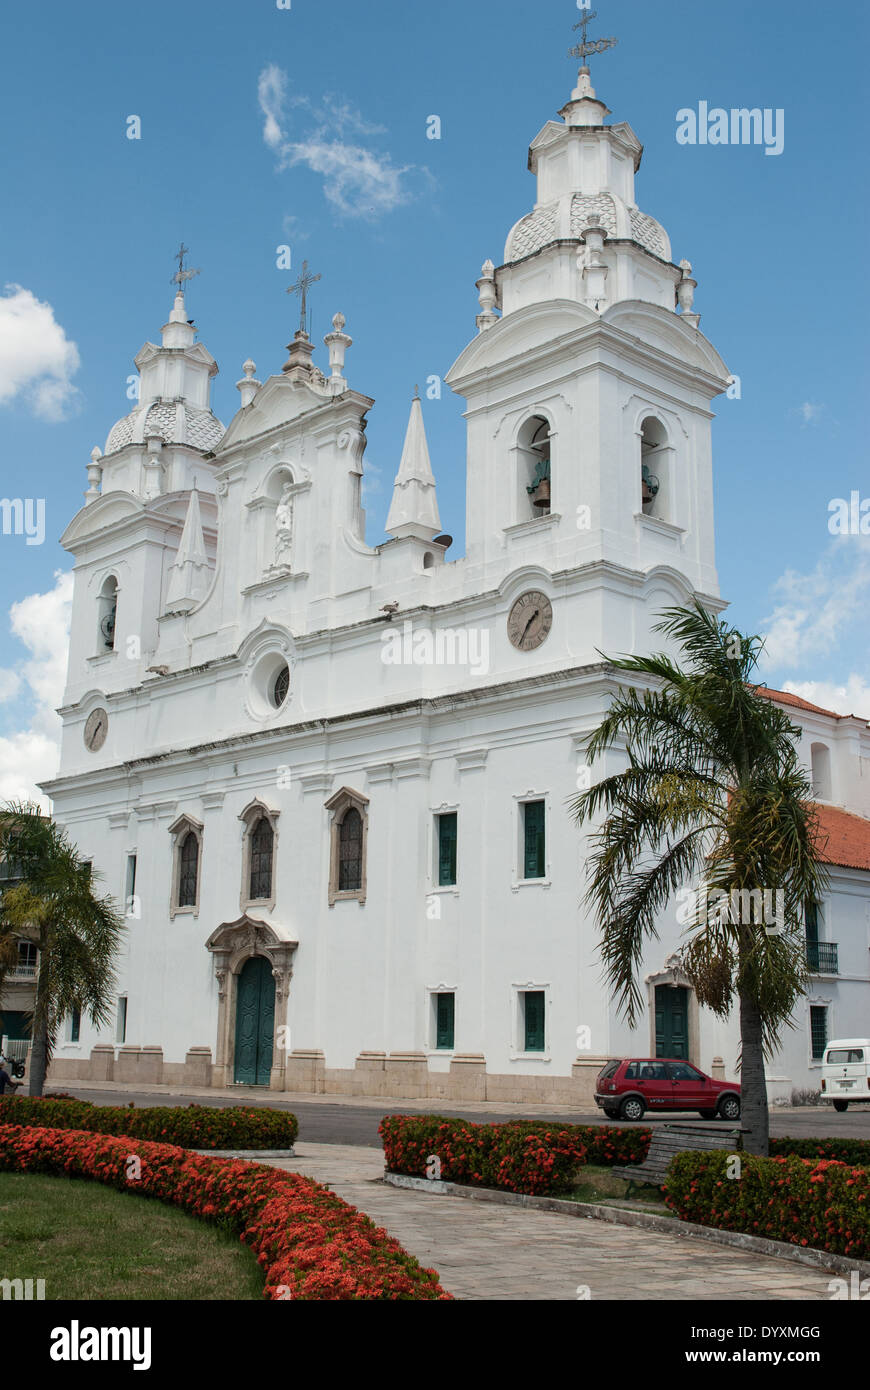 Belem, Para State, Brazil. Cathedral. Catedral da Se. The annual Cirio festival is celebrated here. Stock Photo